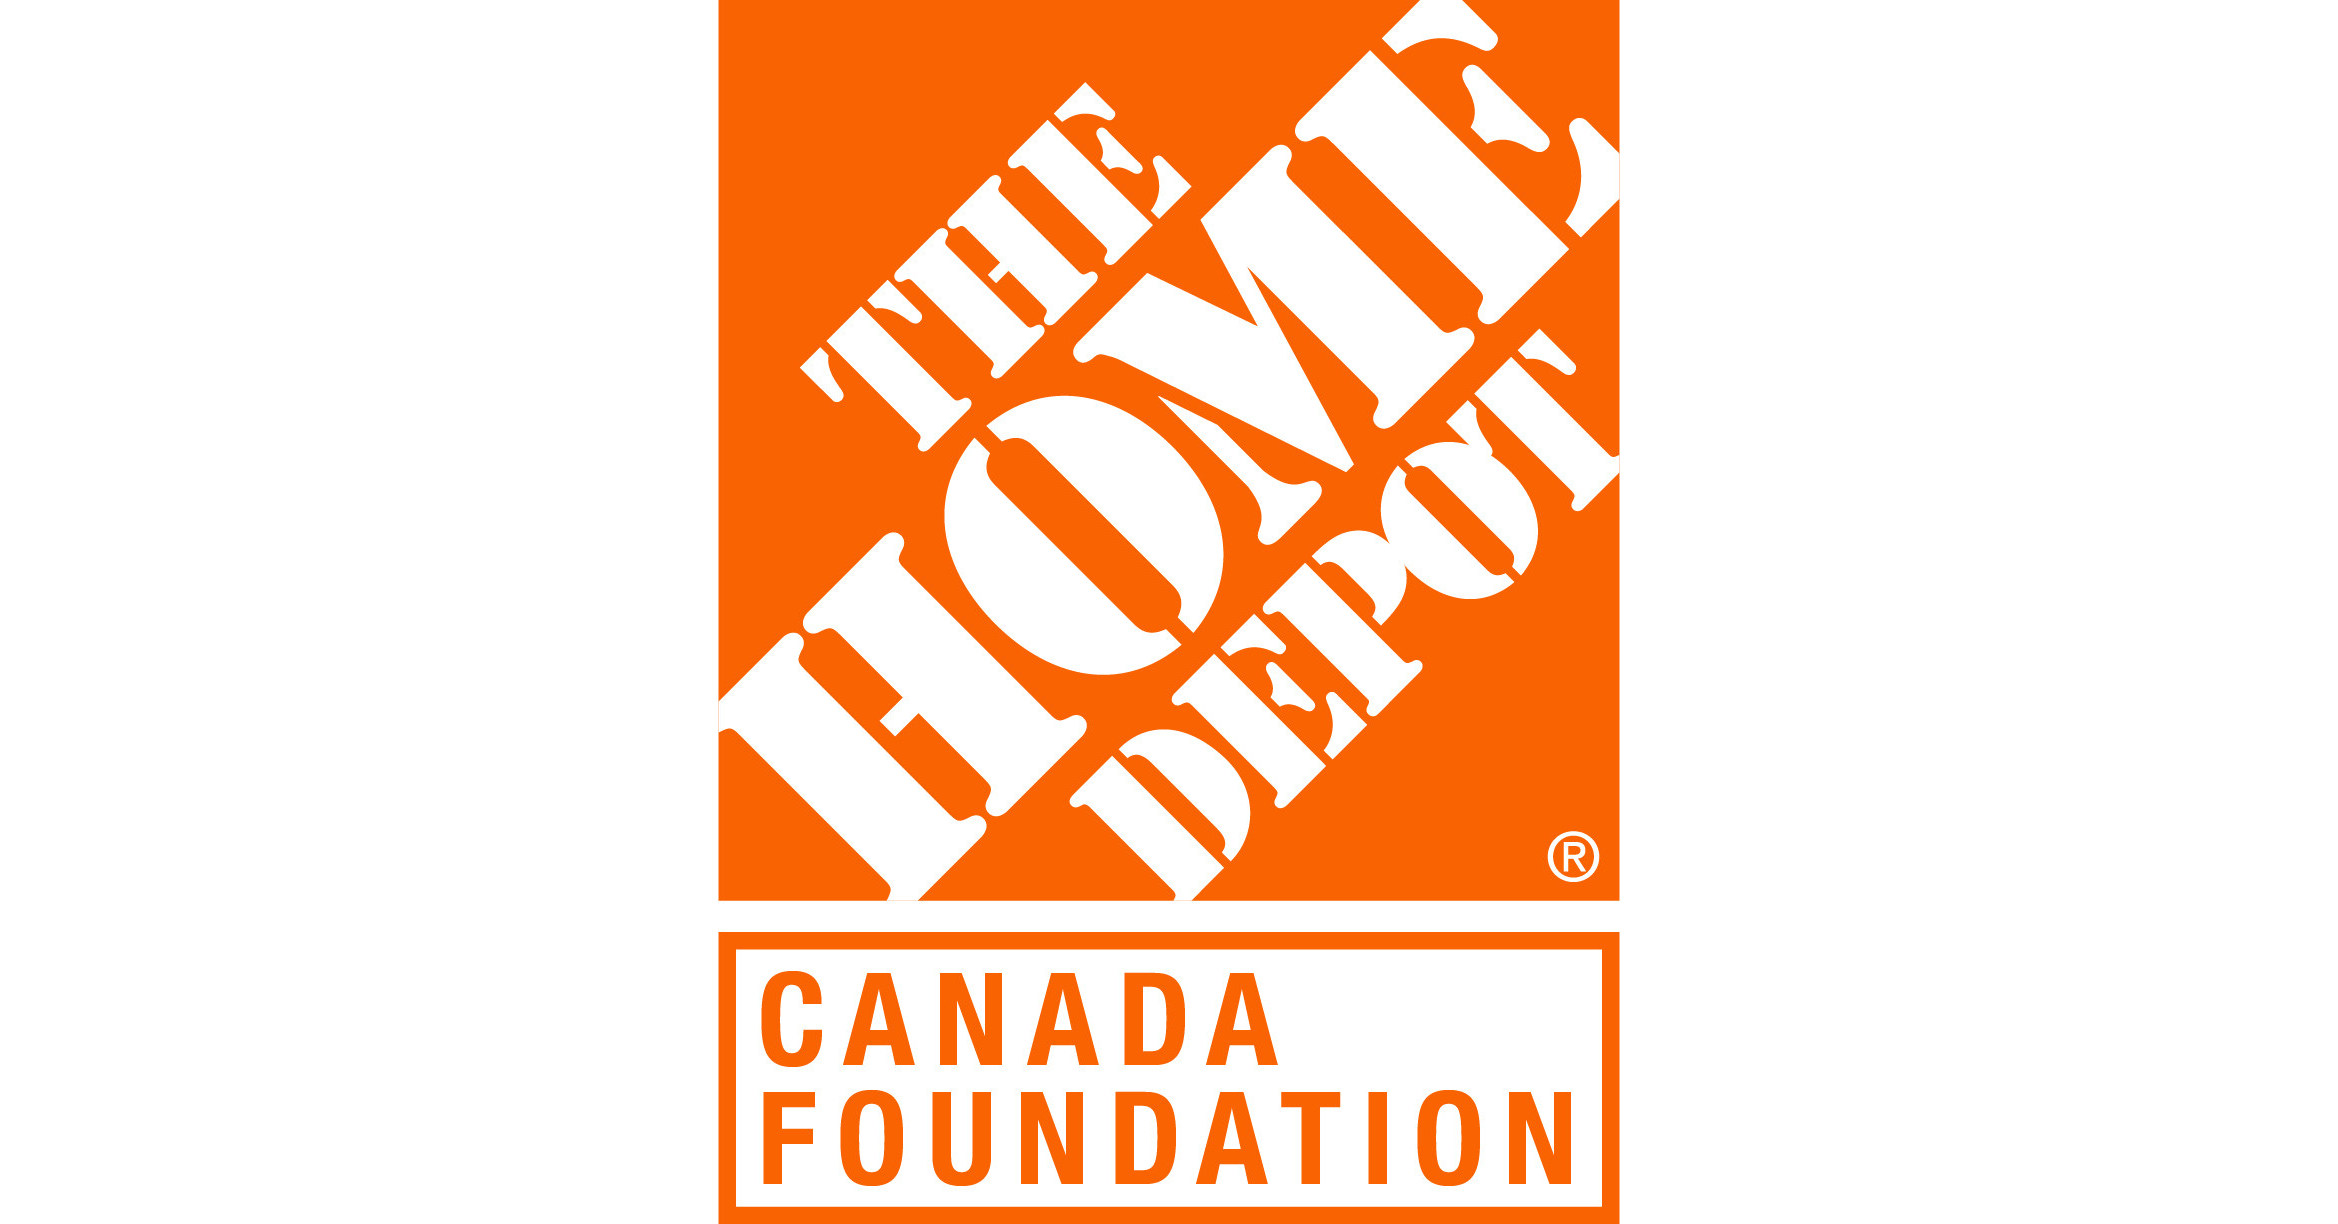 Home Depot Canada Photos and Images